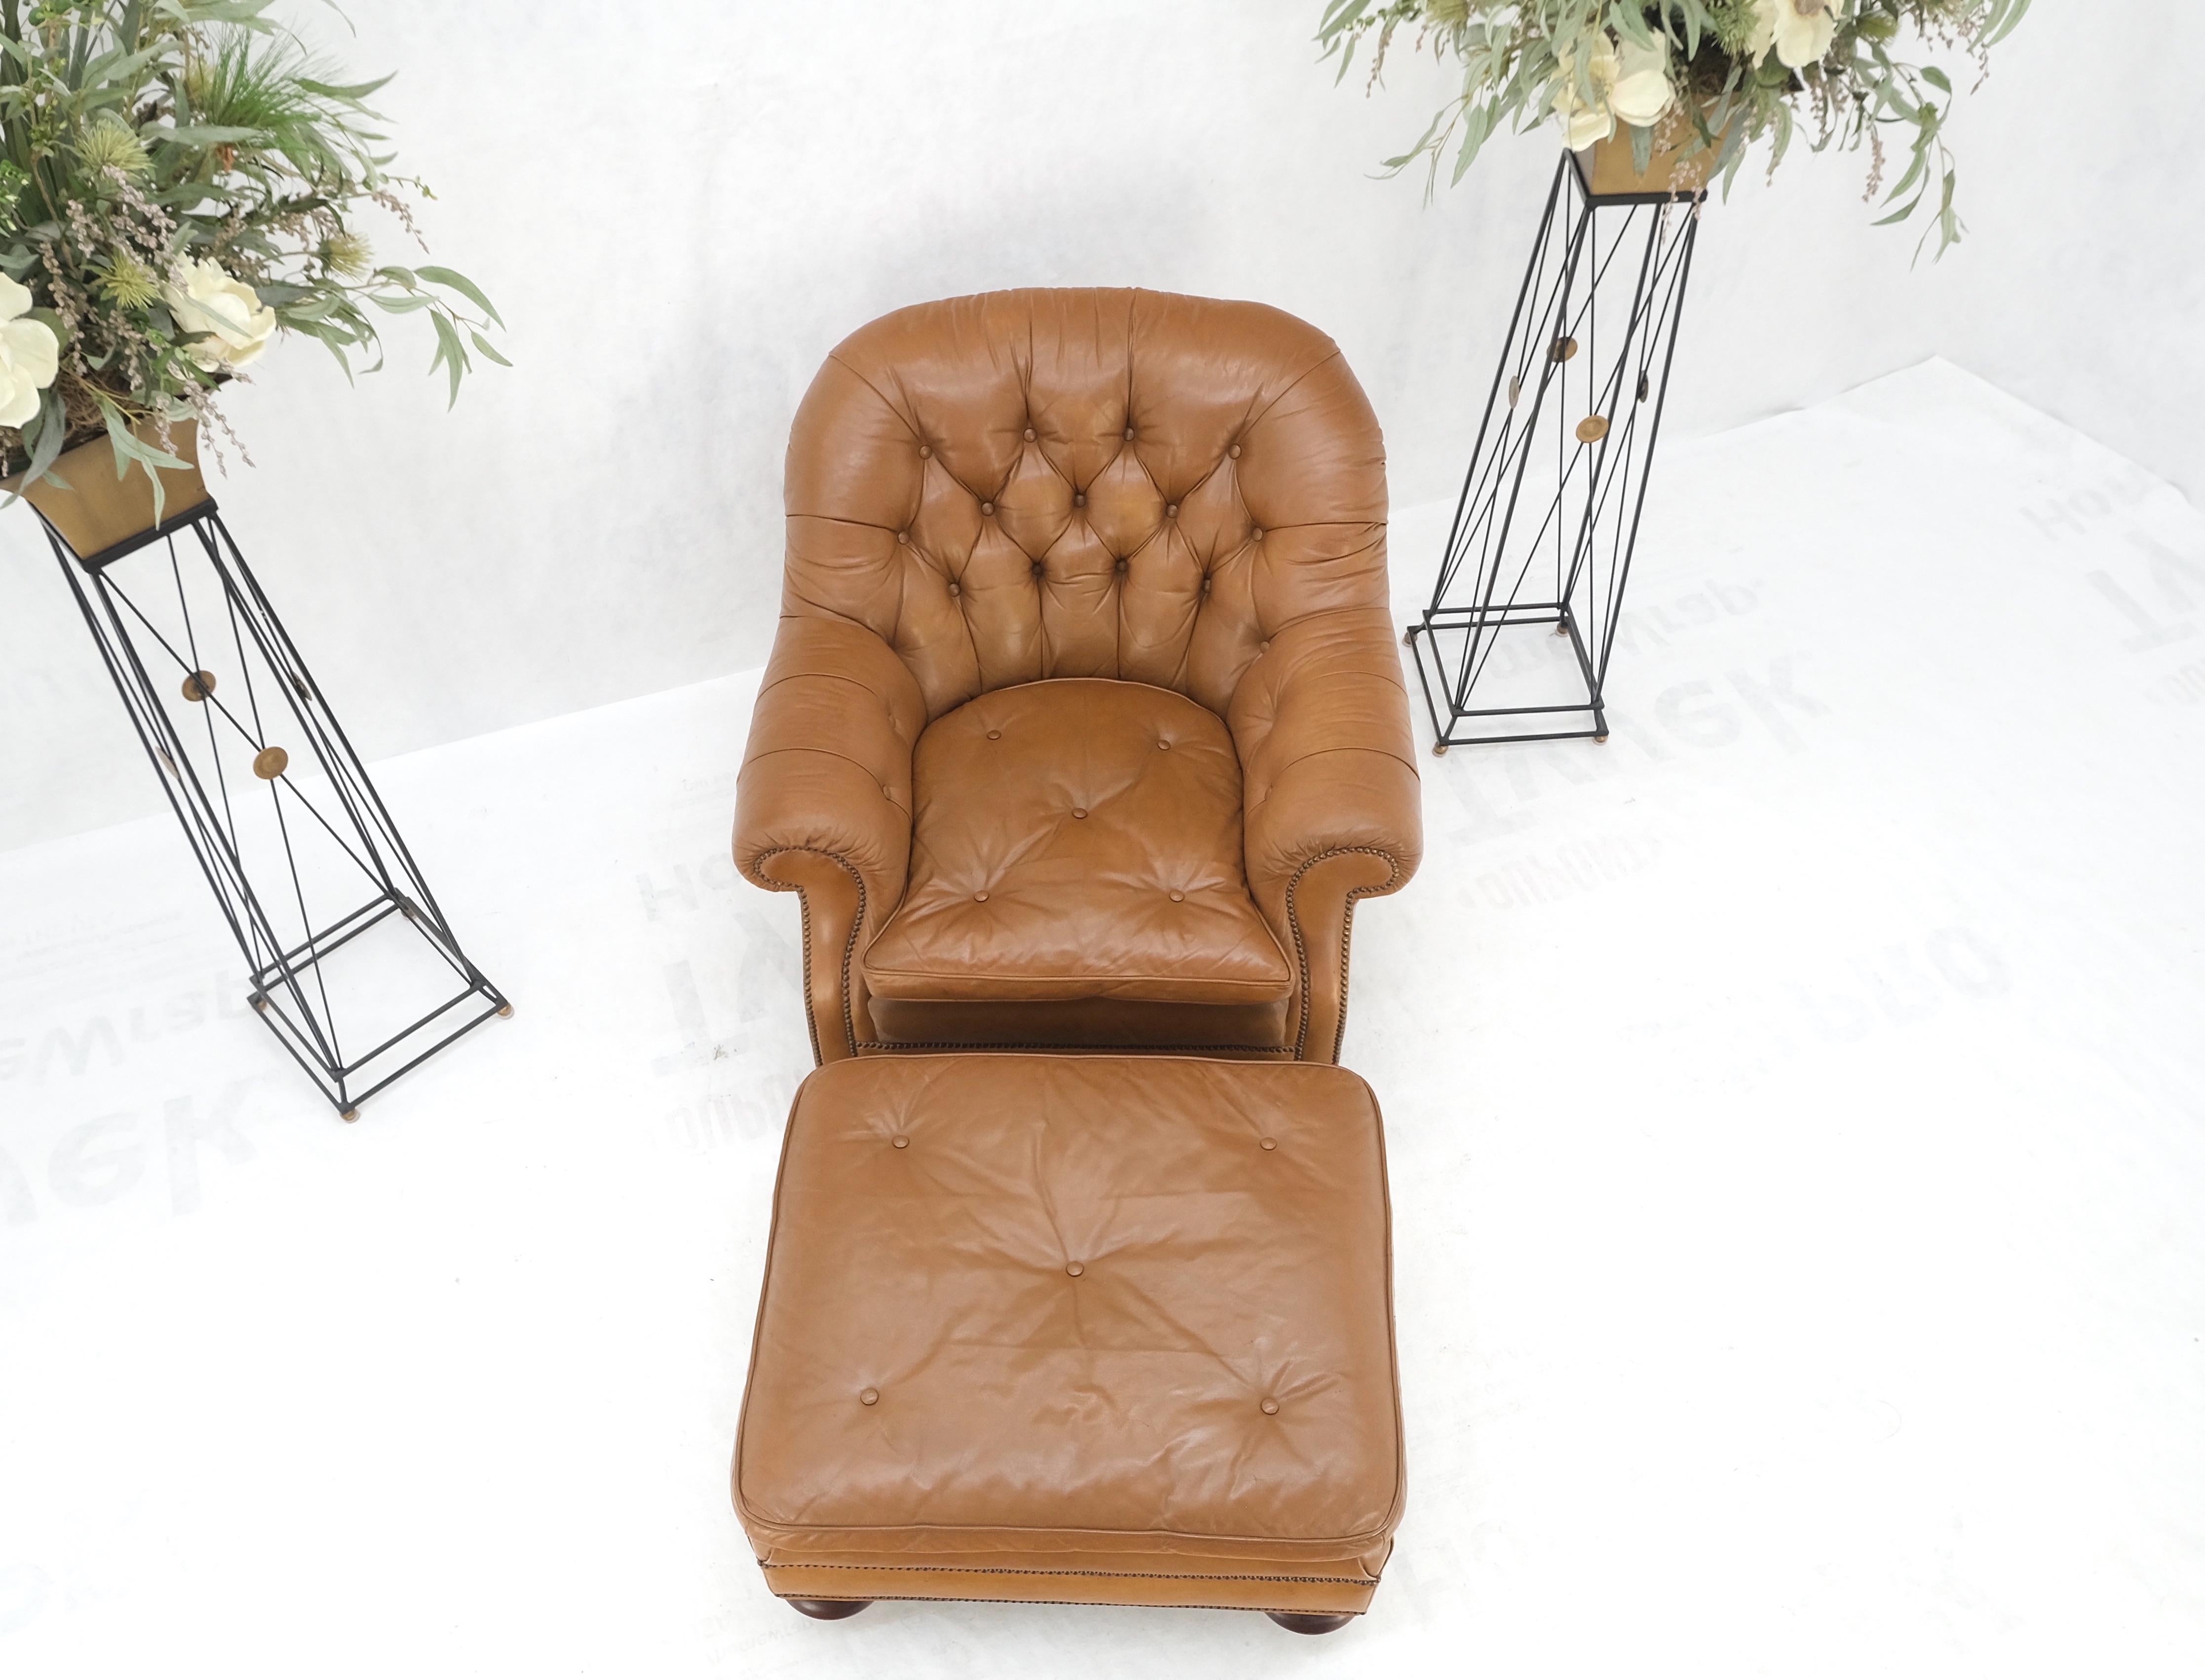 American Baker Tan Leather Tufted Back Large Arm Chair w/ Ottoman Pouf Turned Legs MINT! For Sale